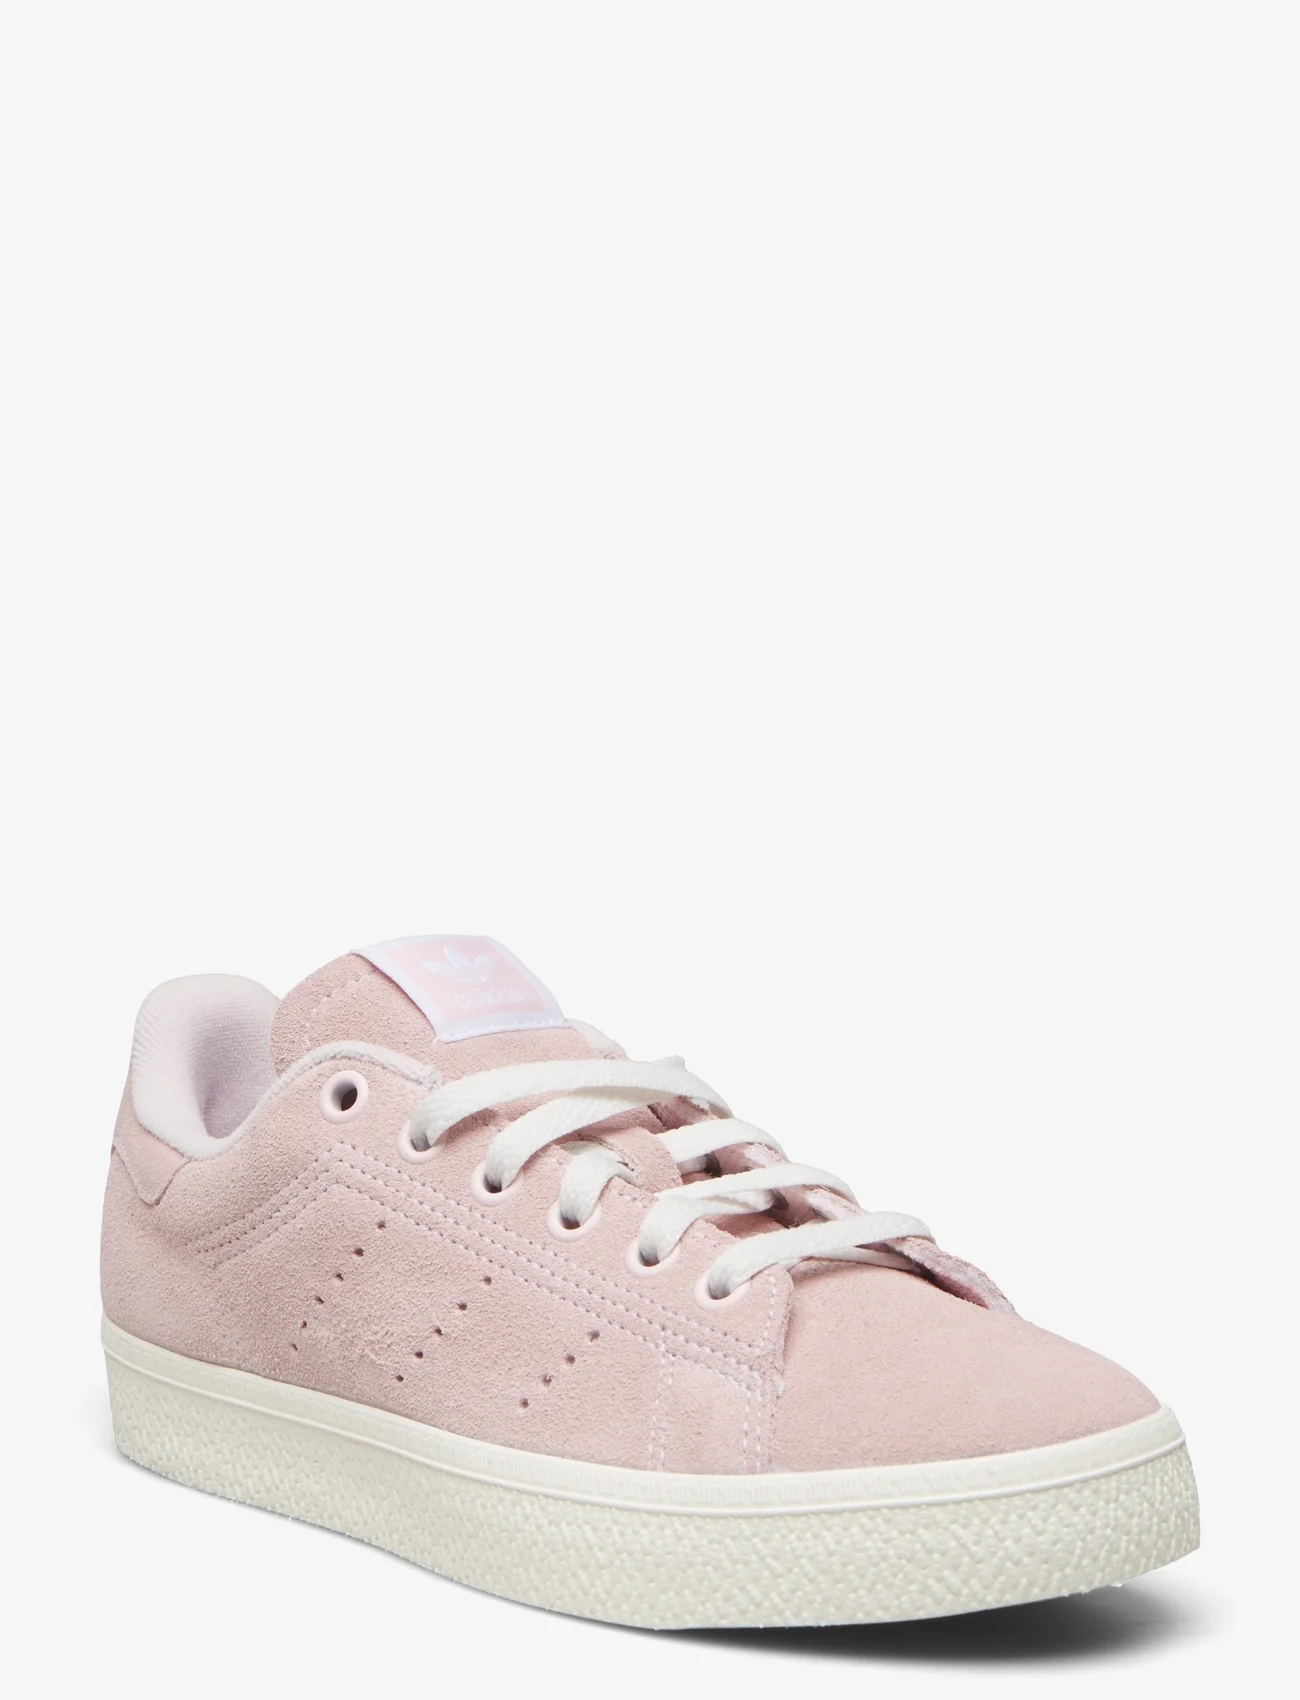 adidas Originals - STAN SMITH CS W - sneakers - clpink/ftwwht/cwhite - 0